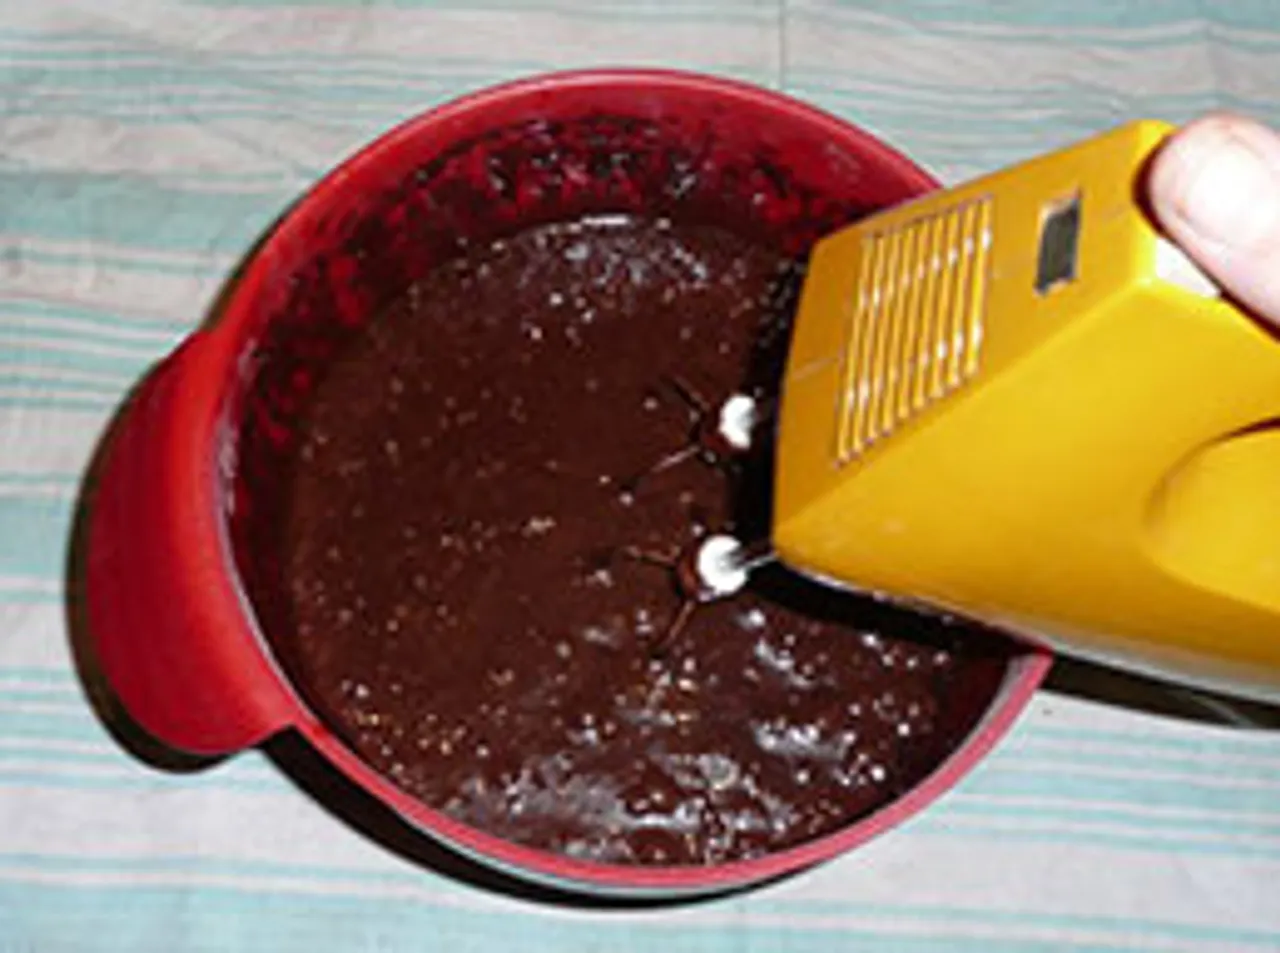 Mixing the cake